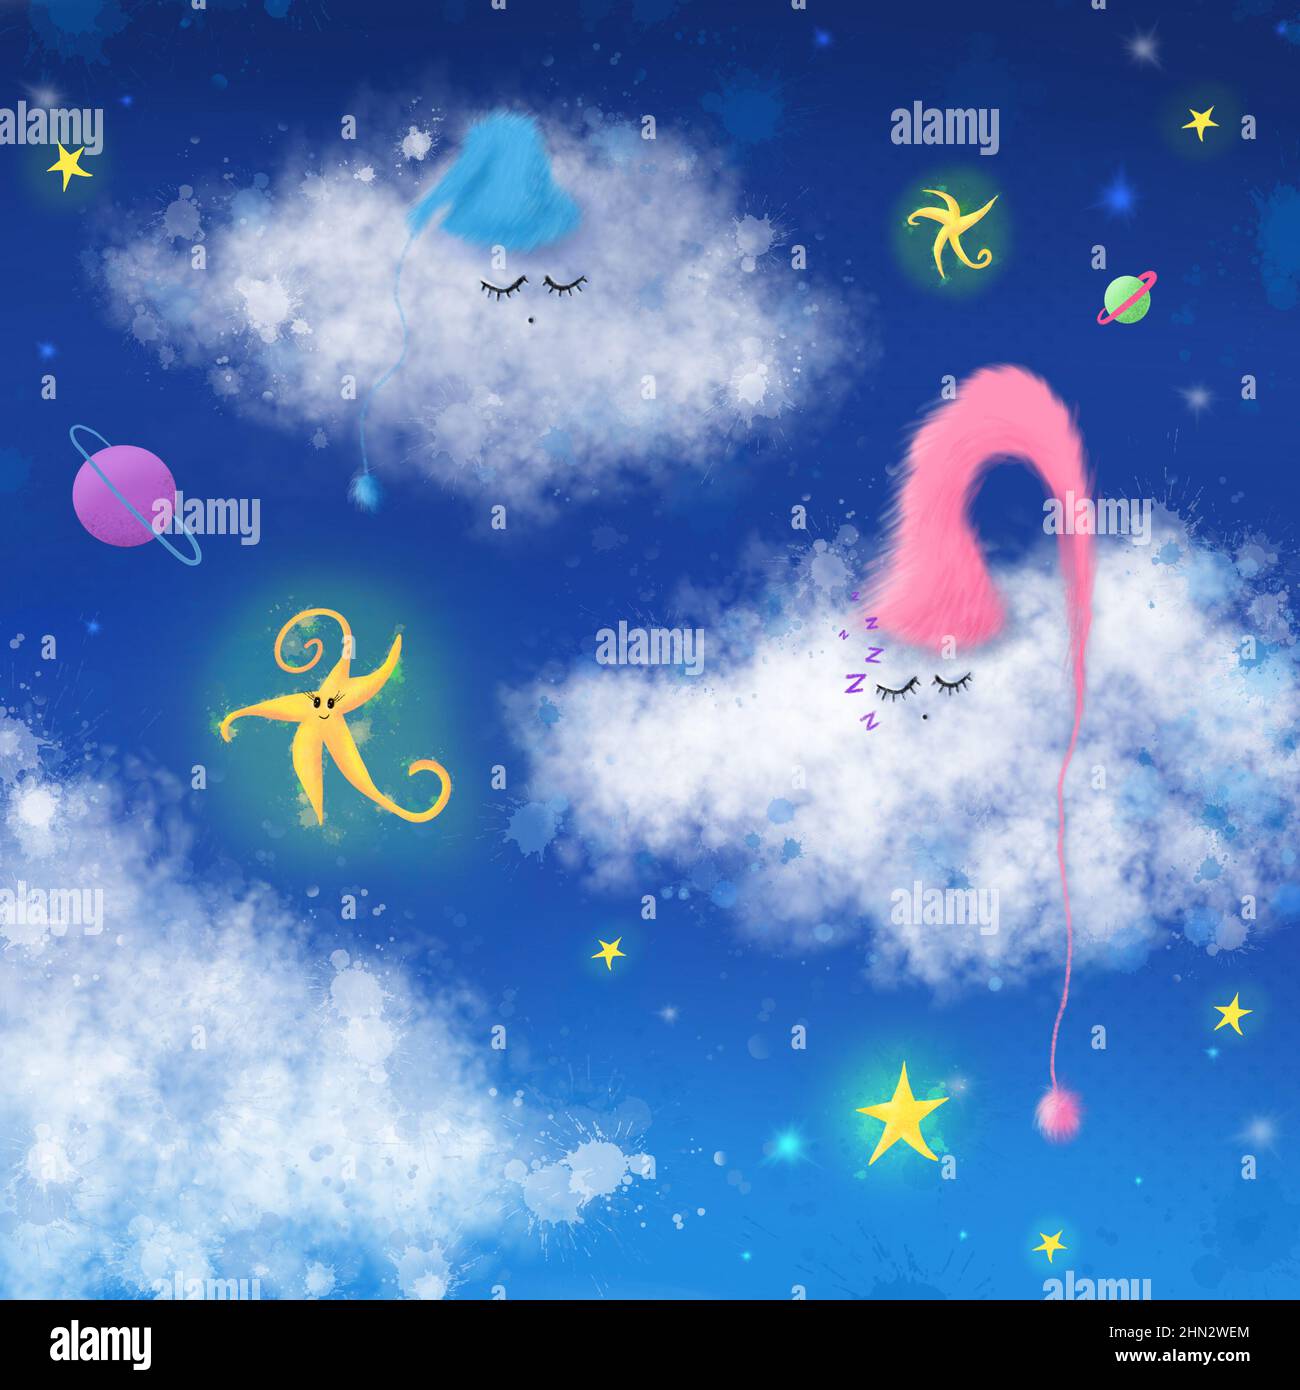 Cute sleepy clouds on the sky, sweet dreams and good night background hand draw illustration Stock Photo